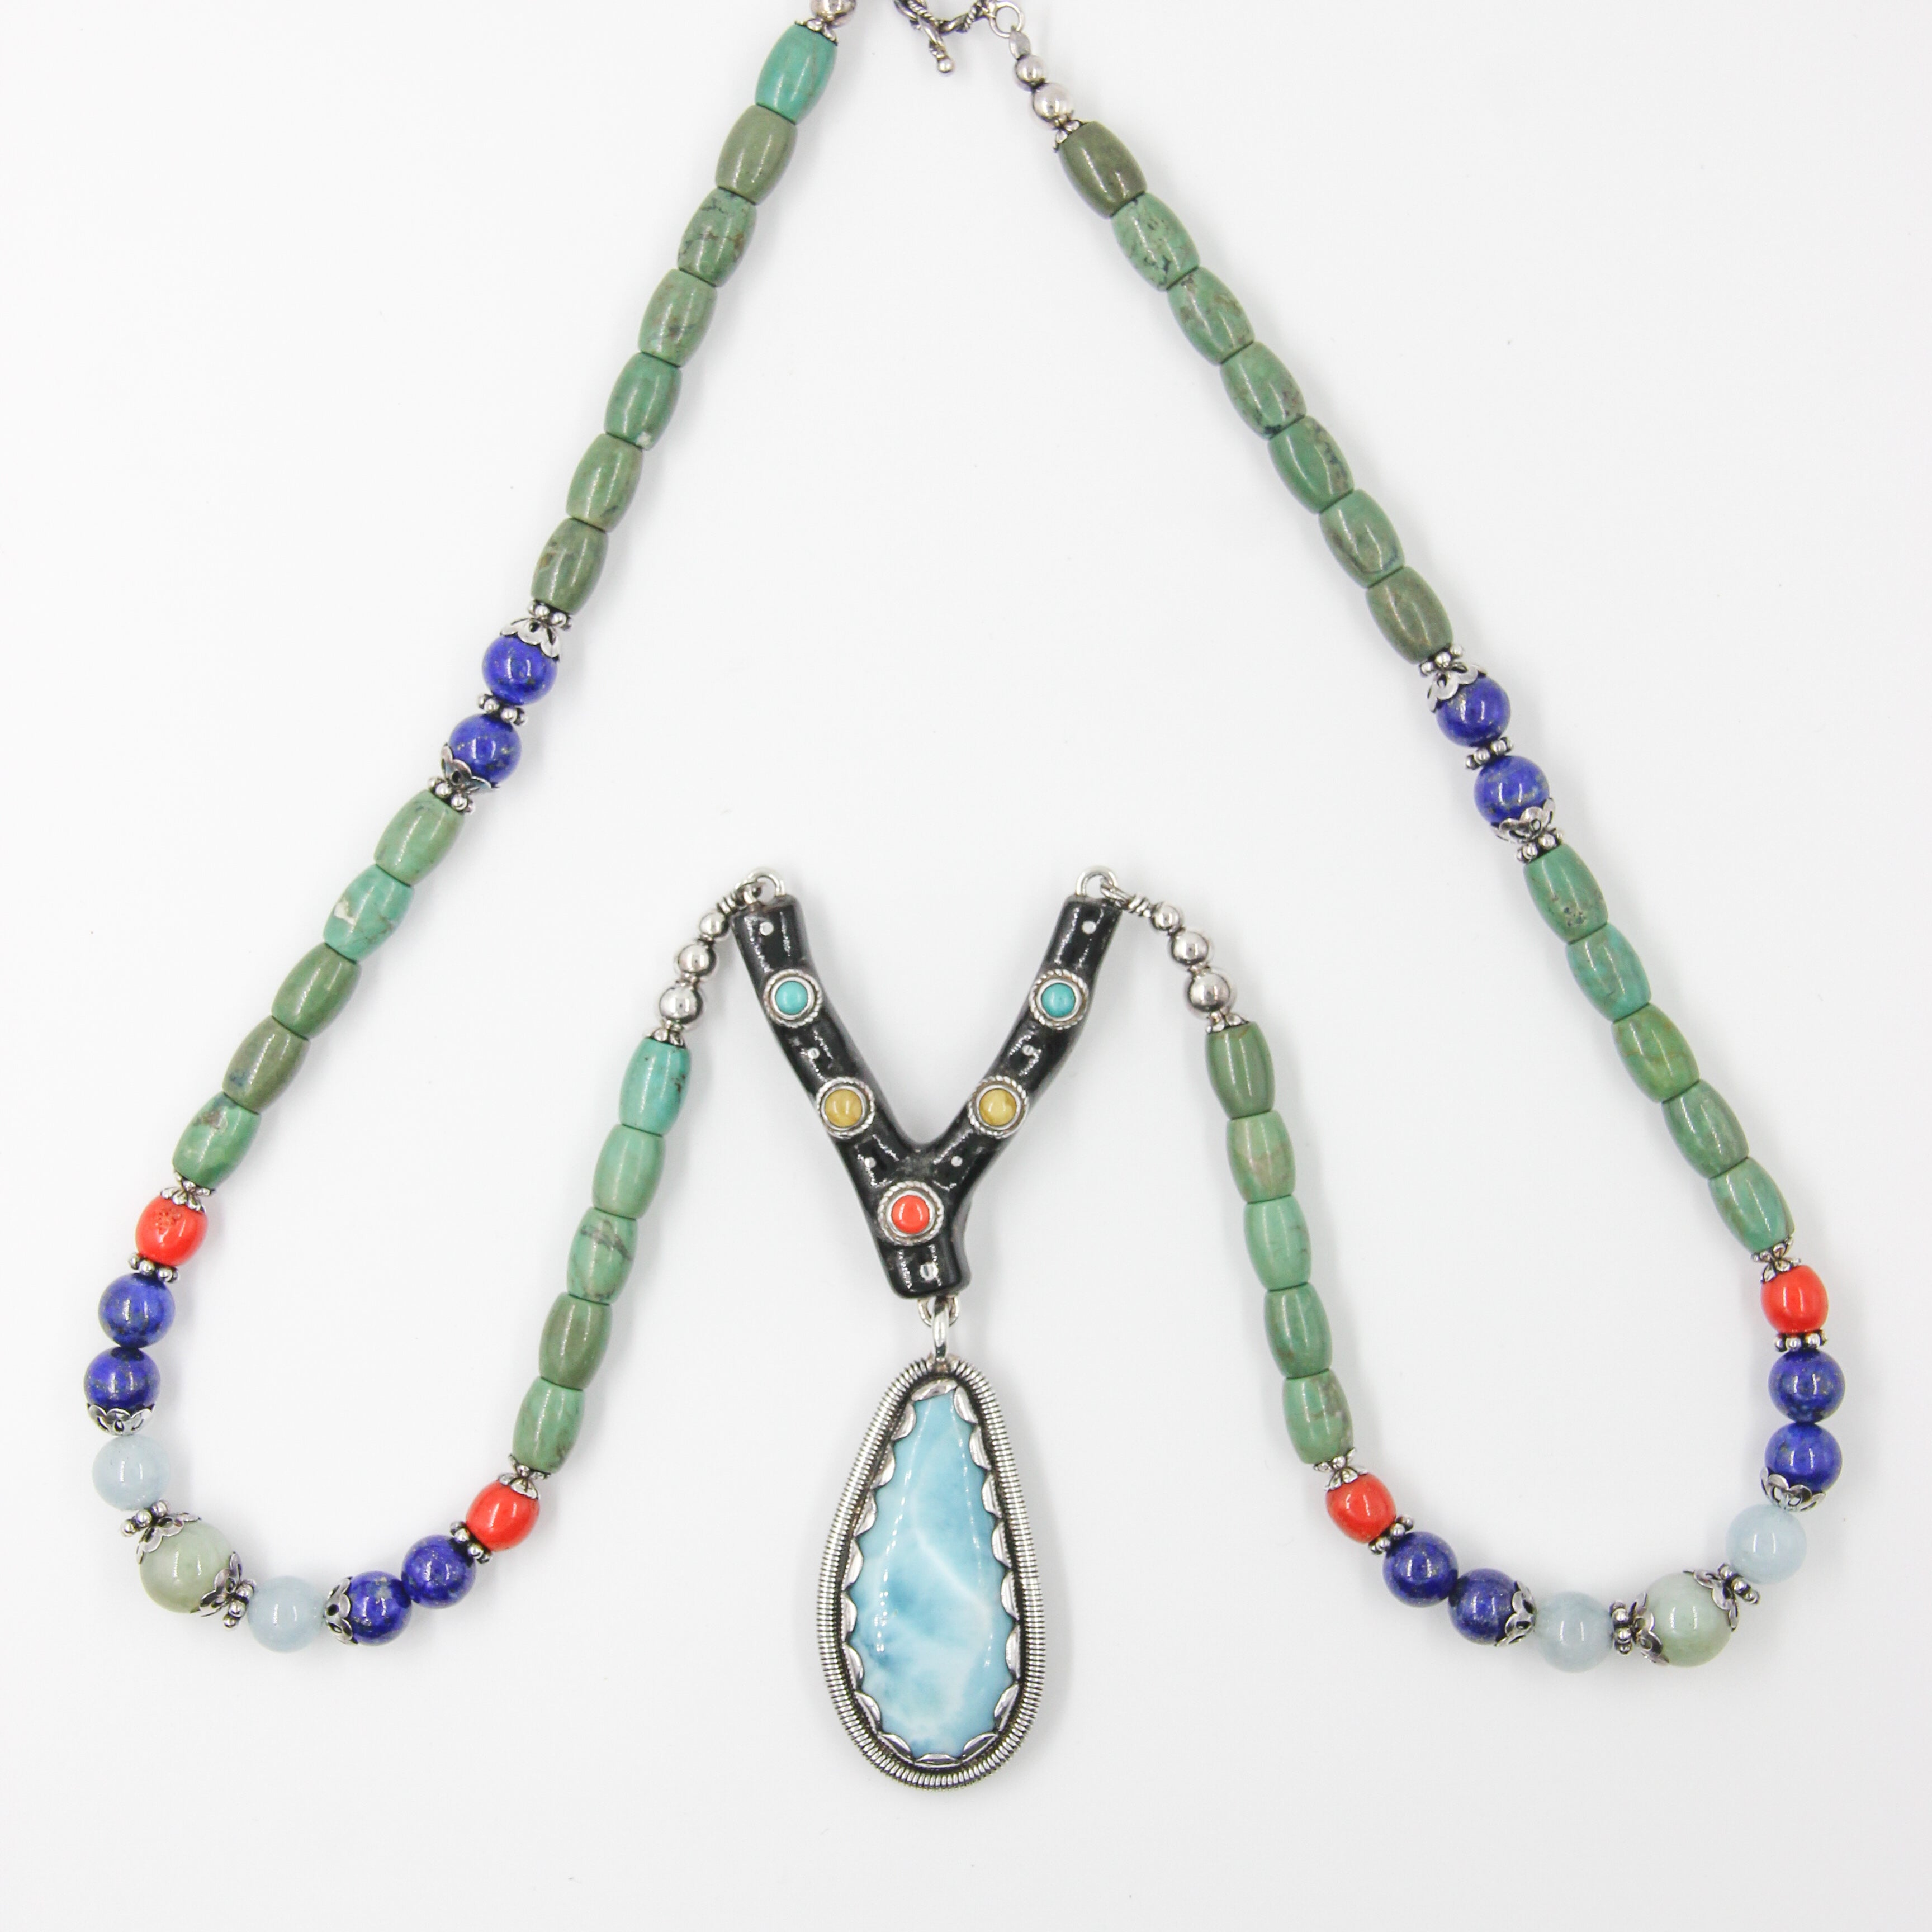 Larimar Stone Necklace with Black Coral, Turquoise, Red Coral, Lapis Lazuli, Aquamarine, Jade and Silver Beads